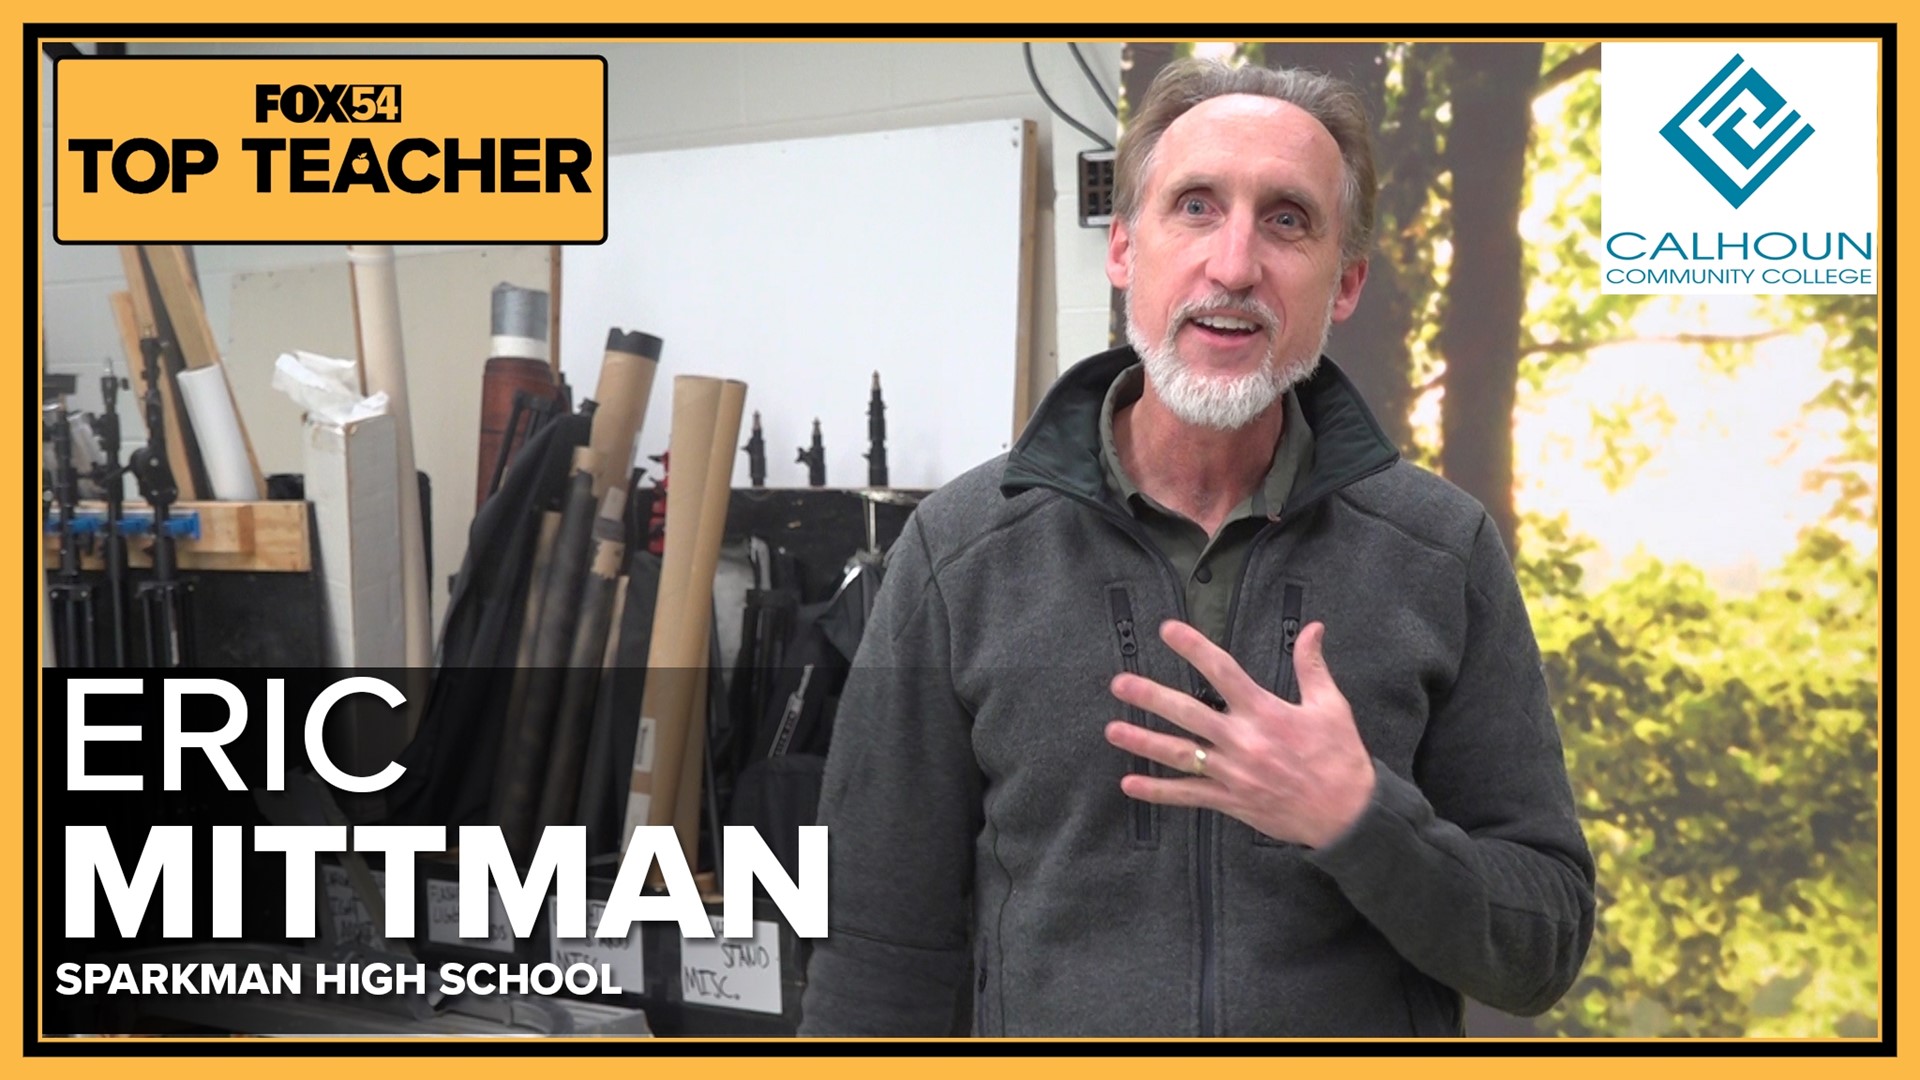 This week's Top Teacher teaches all things photography!